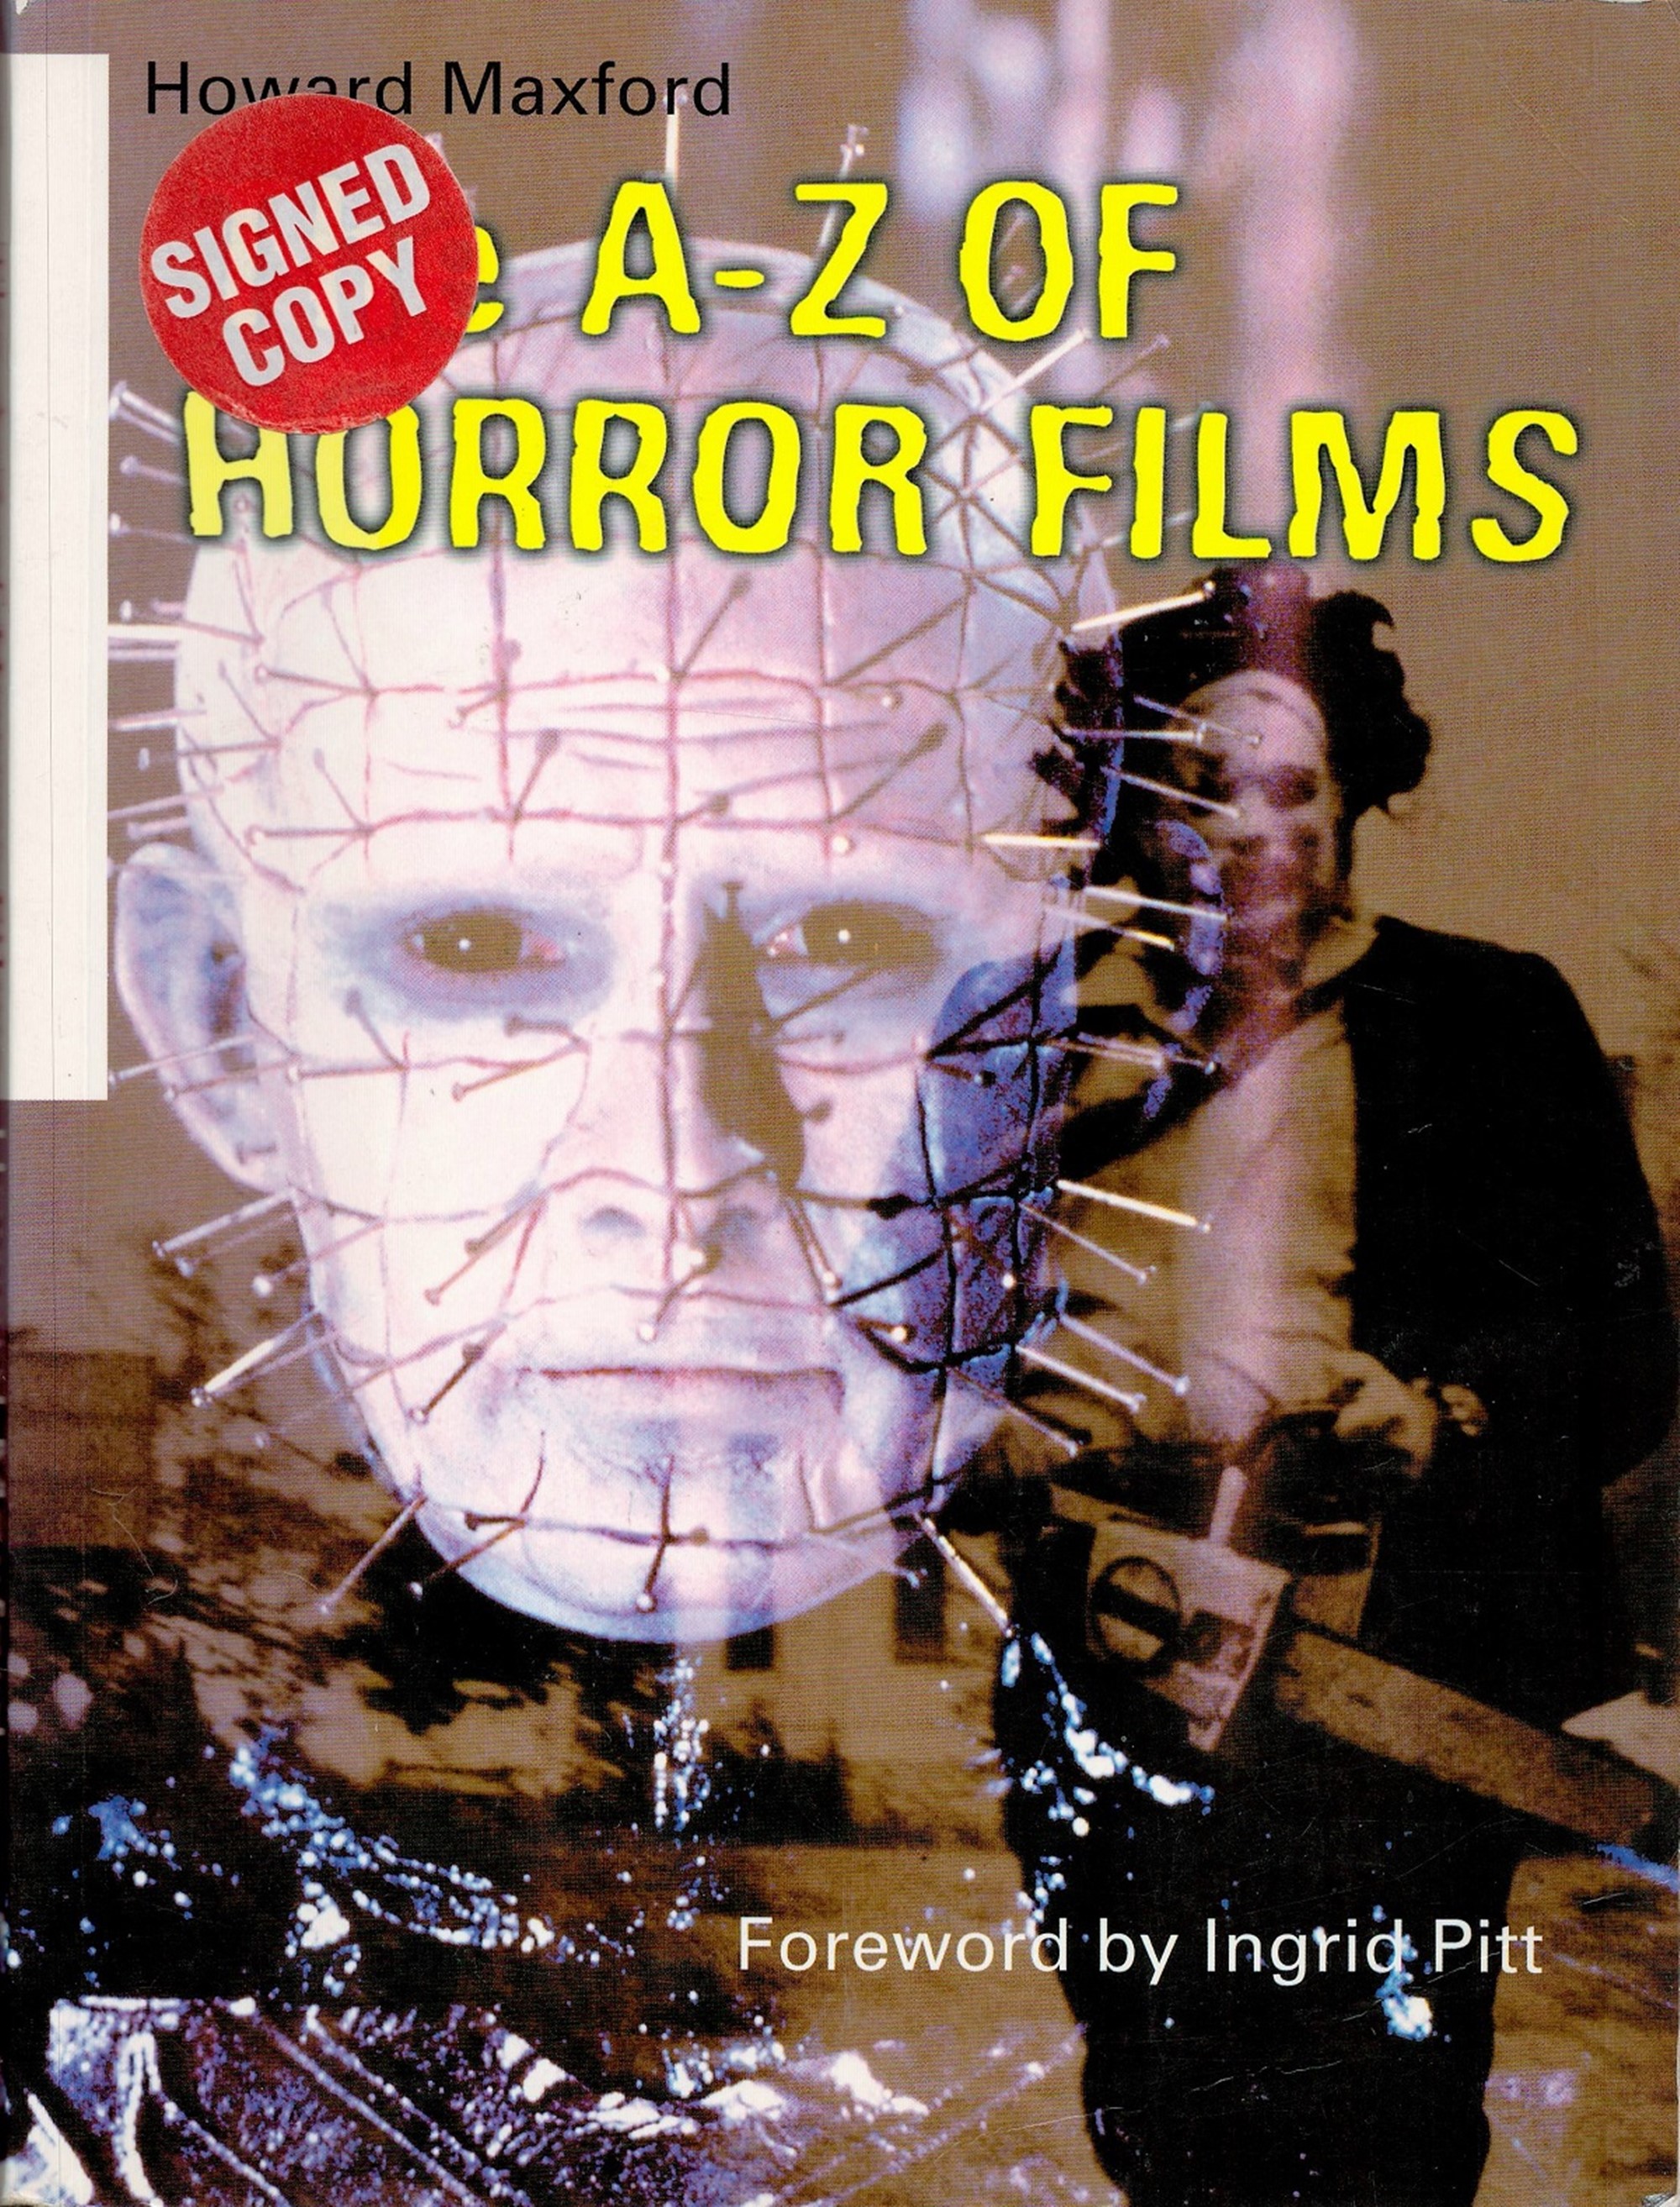 A-Z of Horror Films multi signed Paperback book signatures inside include Robert Englund, Joanna